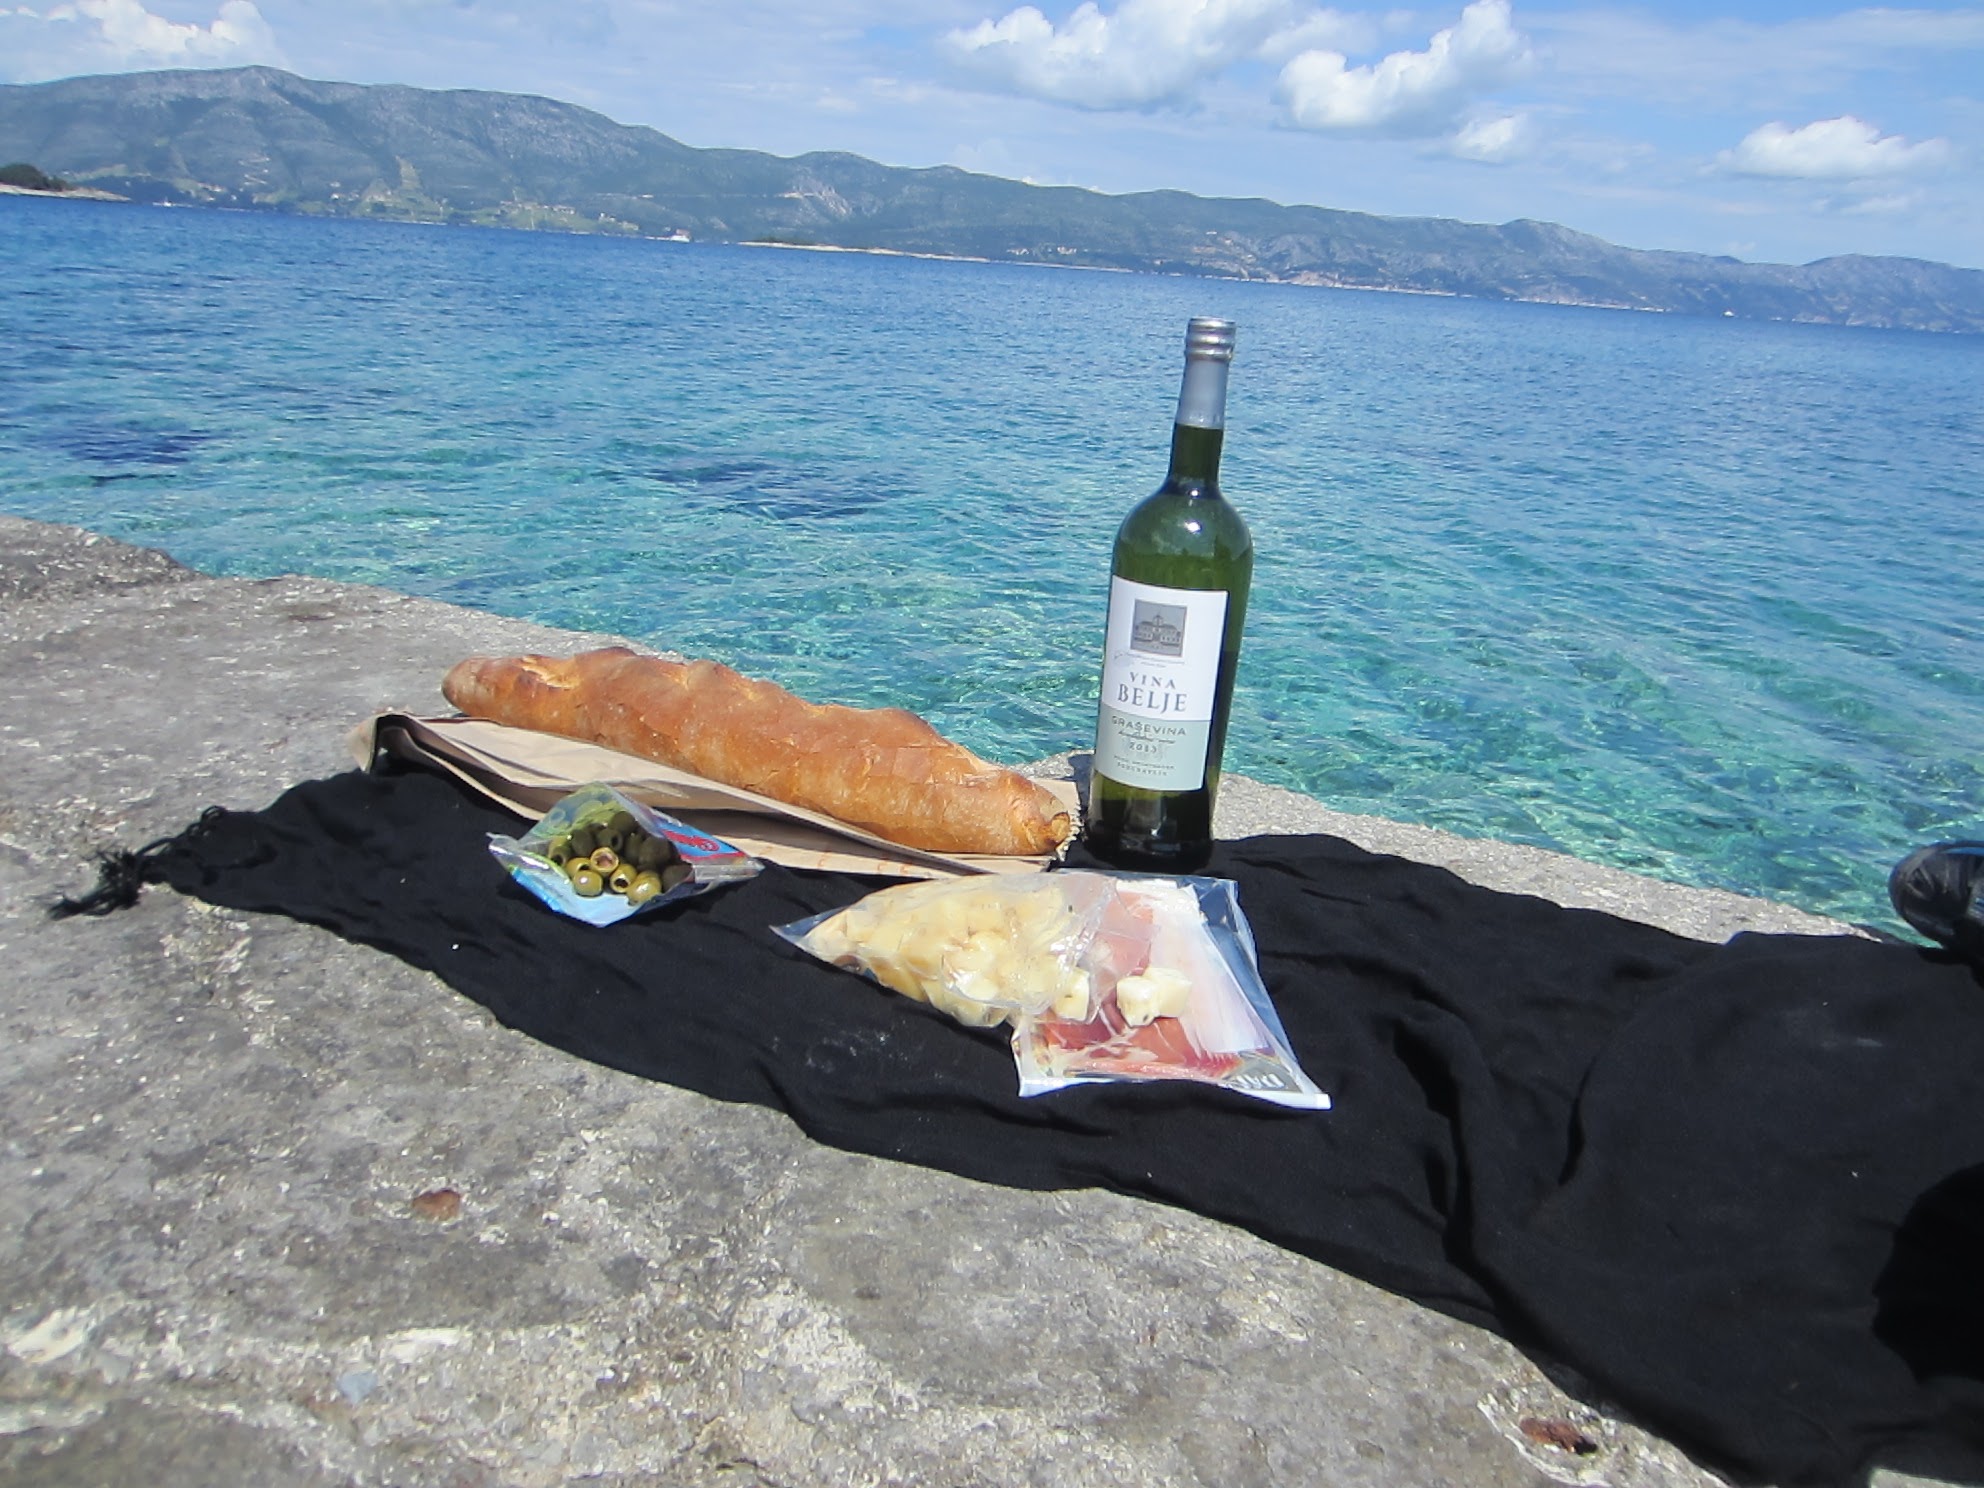 The astounding Adriatic water was the most amazing backdrop for our midday picnic.